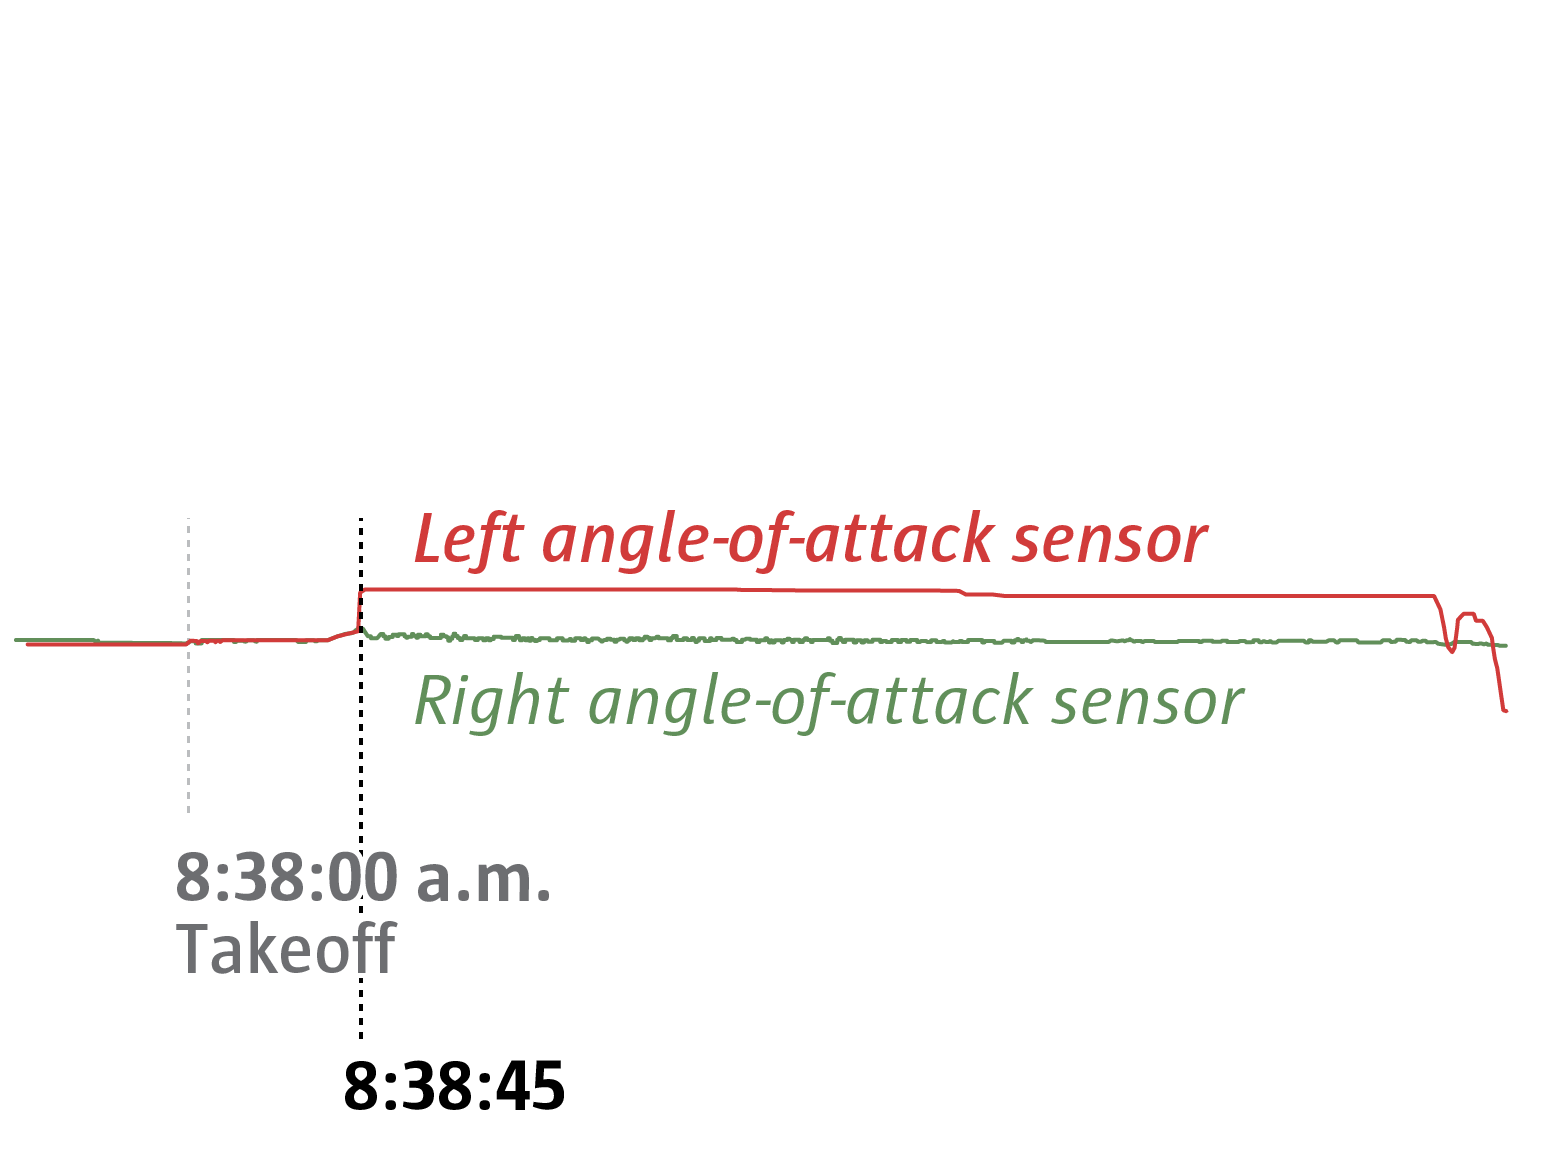 At 8:38am, the left and right angle-of-attack sensors began to record different values.